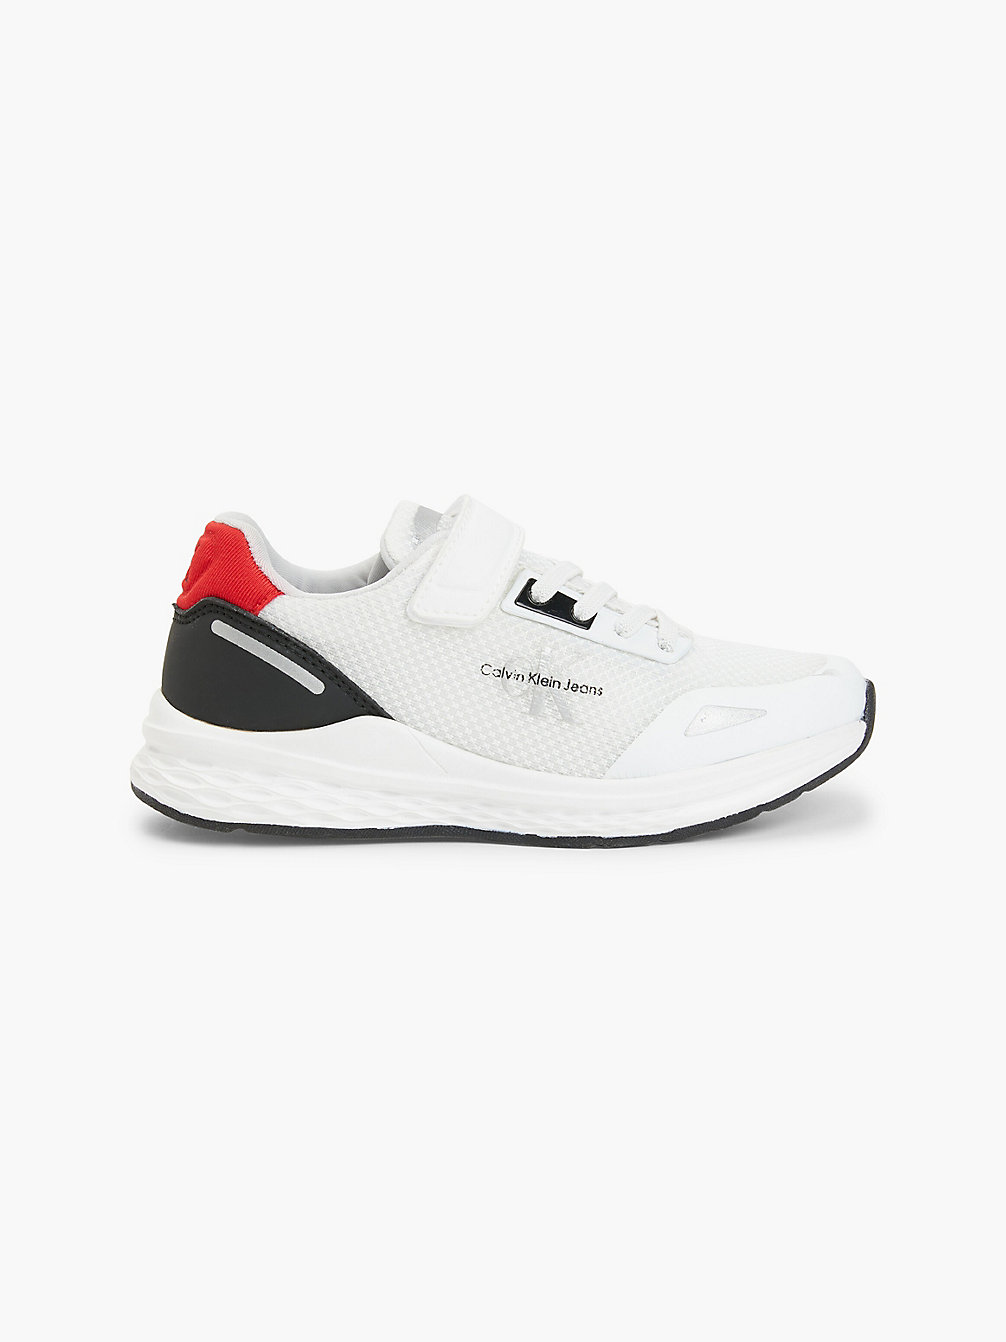 WHITE/RED Mesh Sneakers undefined boys Calvin Klein